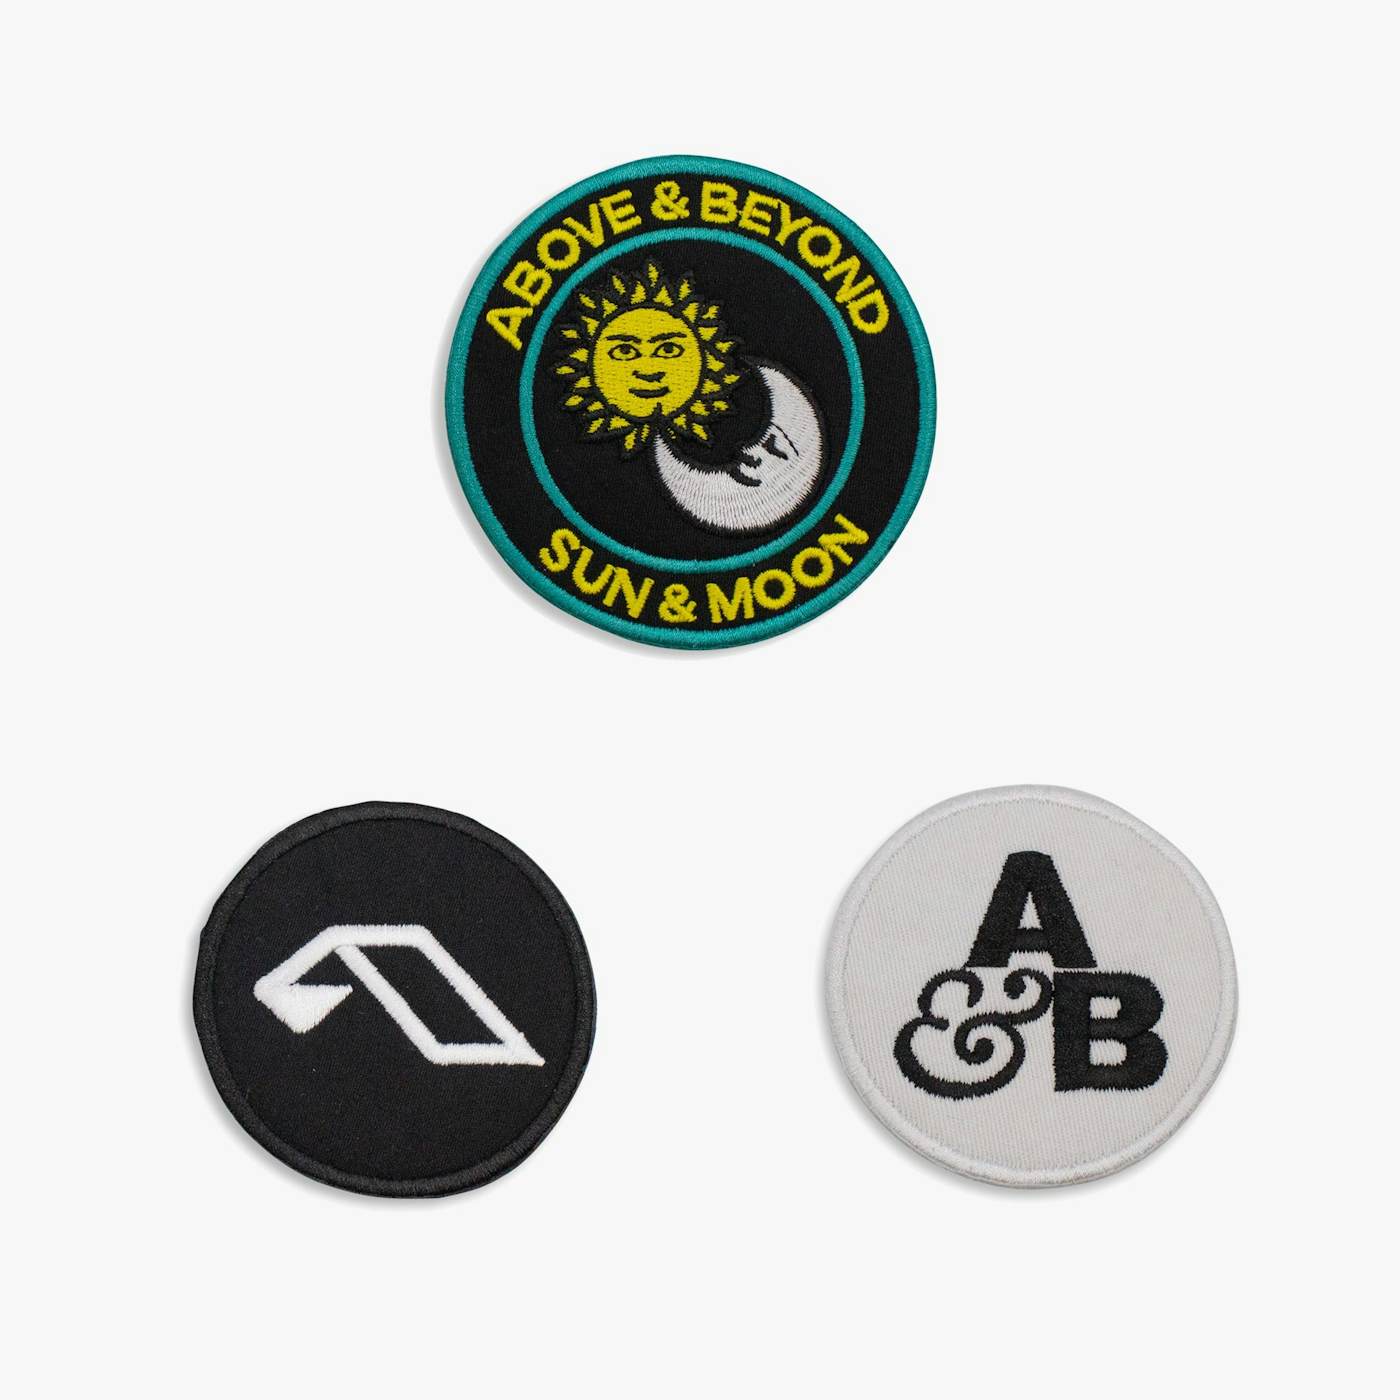 Above & Beyond Anjunastore Iron-On Patches (3-pack)